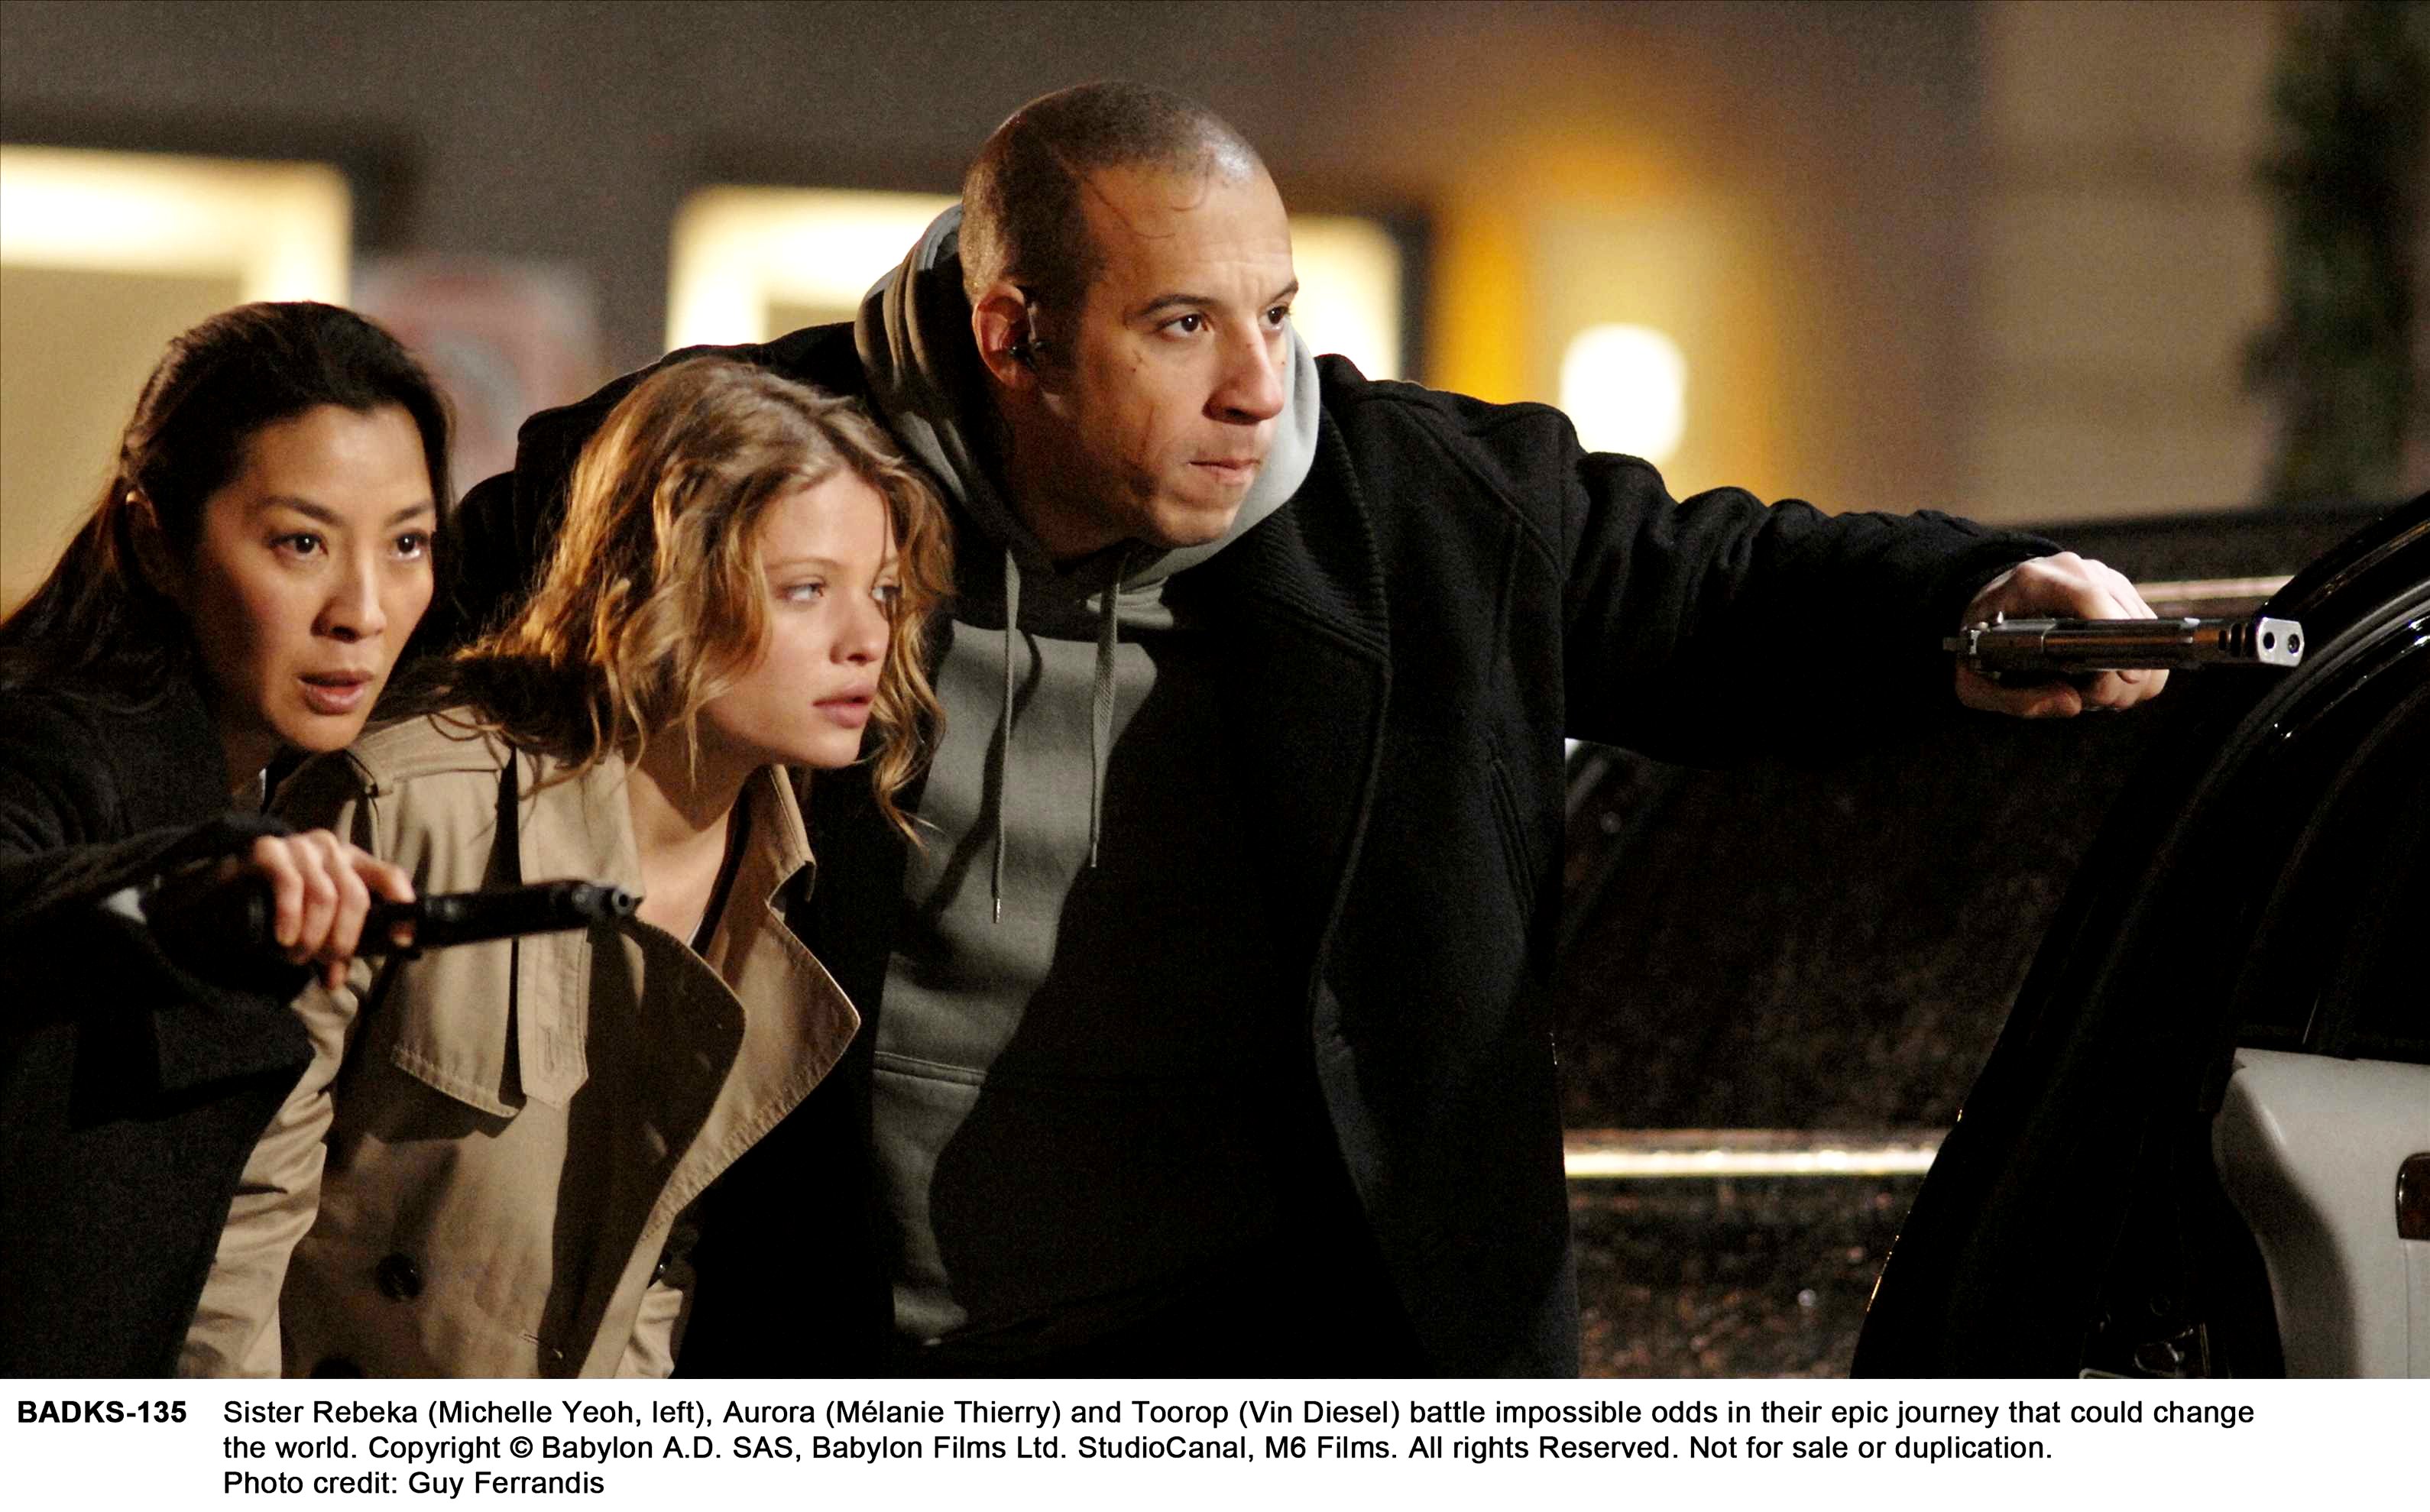 Michelle Yeoh, Melanie Thierry and Vin Diesel in The 20th Century Fox's Babylon A.D. (2008). Photo credit by Guy Ferrandis.